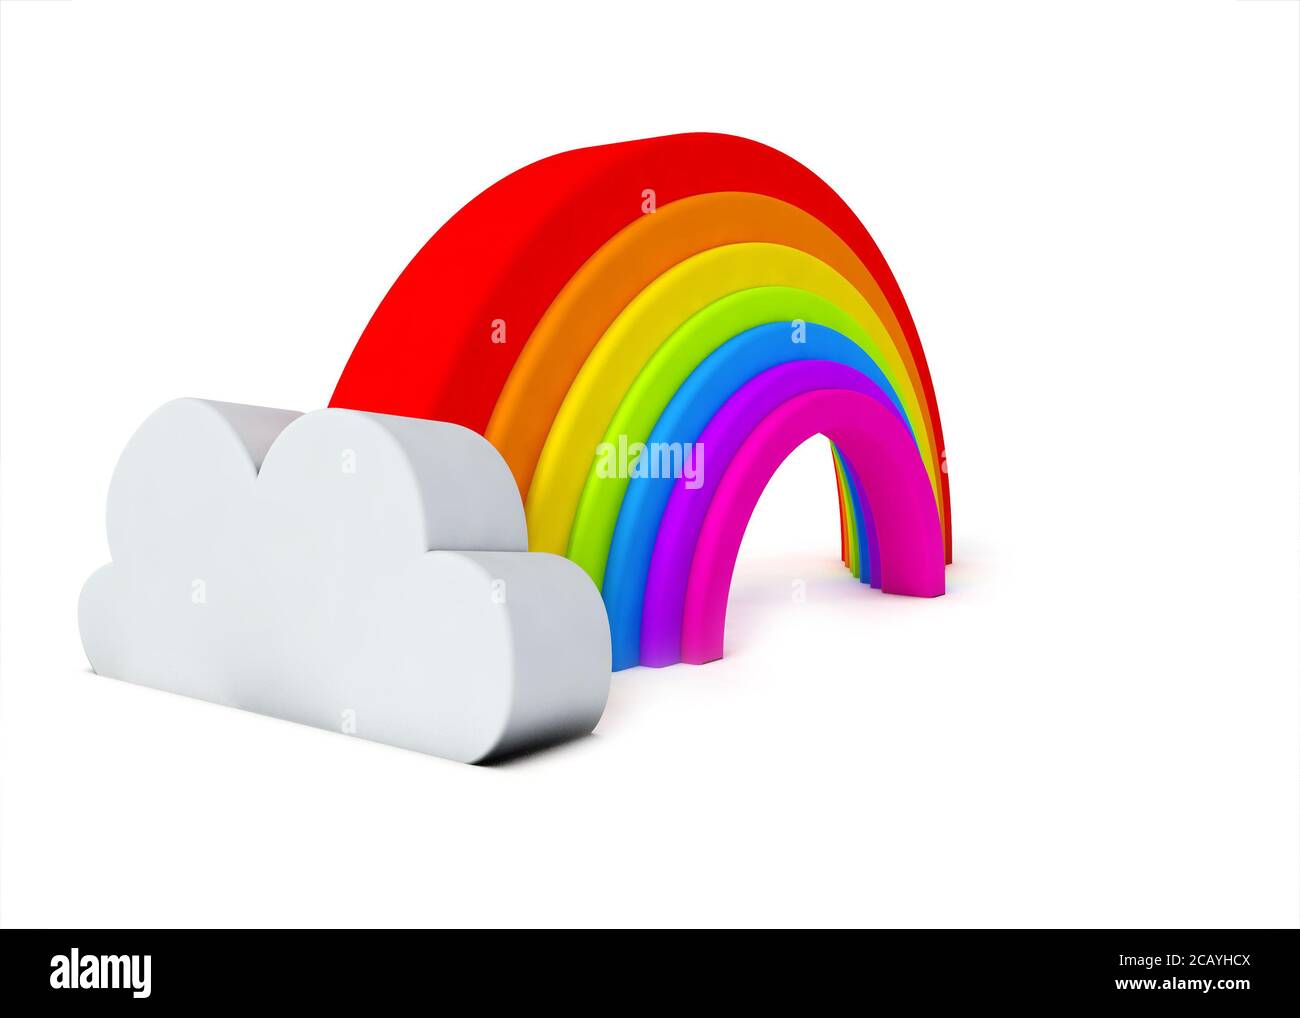 3D RENDER ILLUSTRATION OF A RAINBOW ON A WHITE BACKGROUND WITH CLOUDS Stock Photo